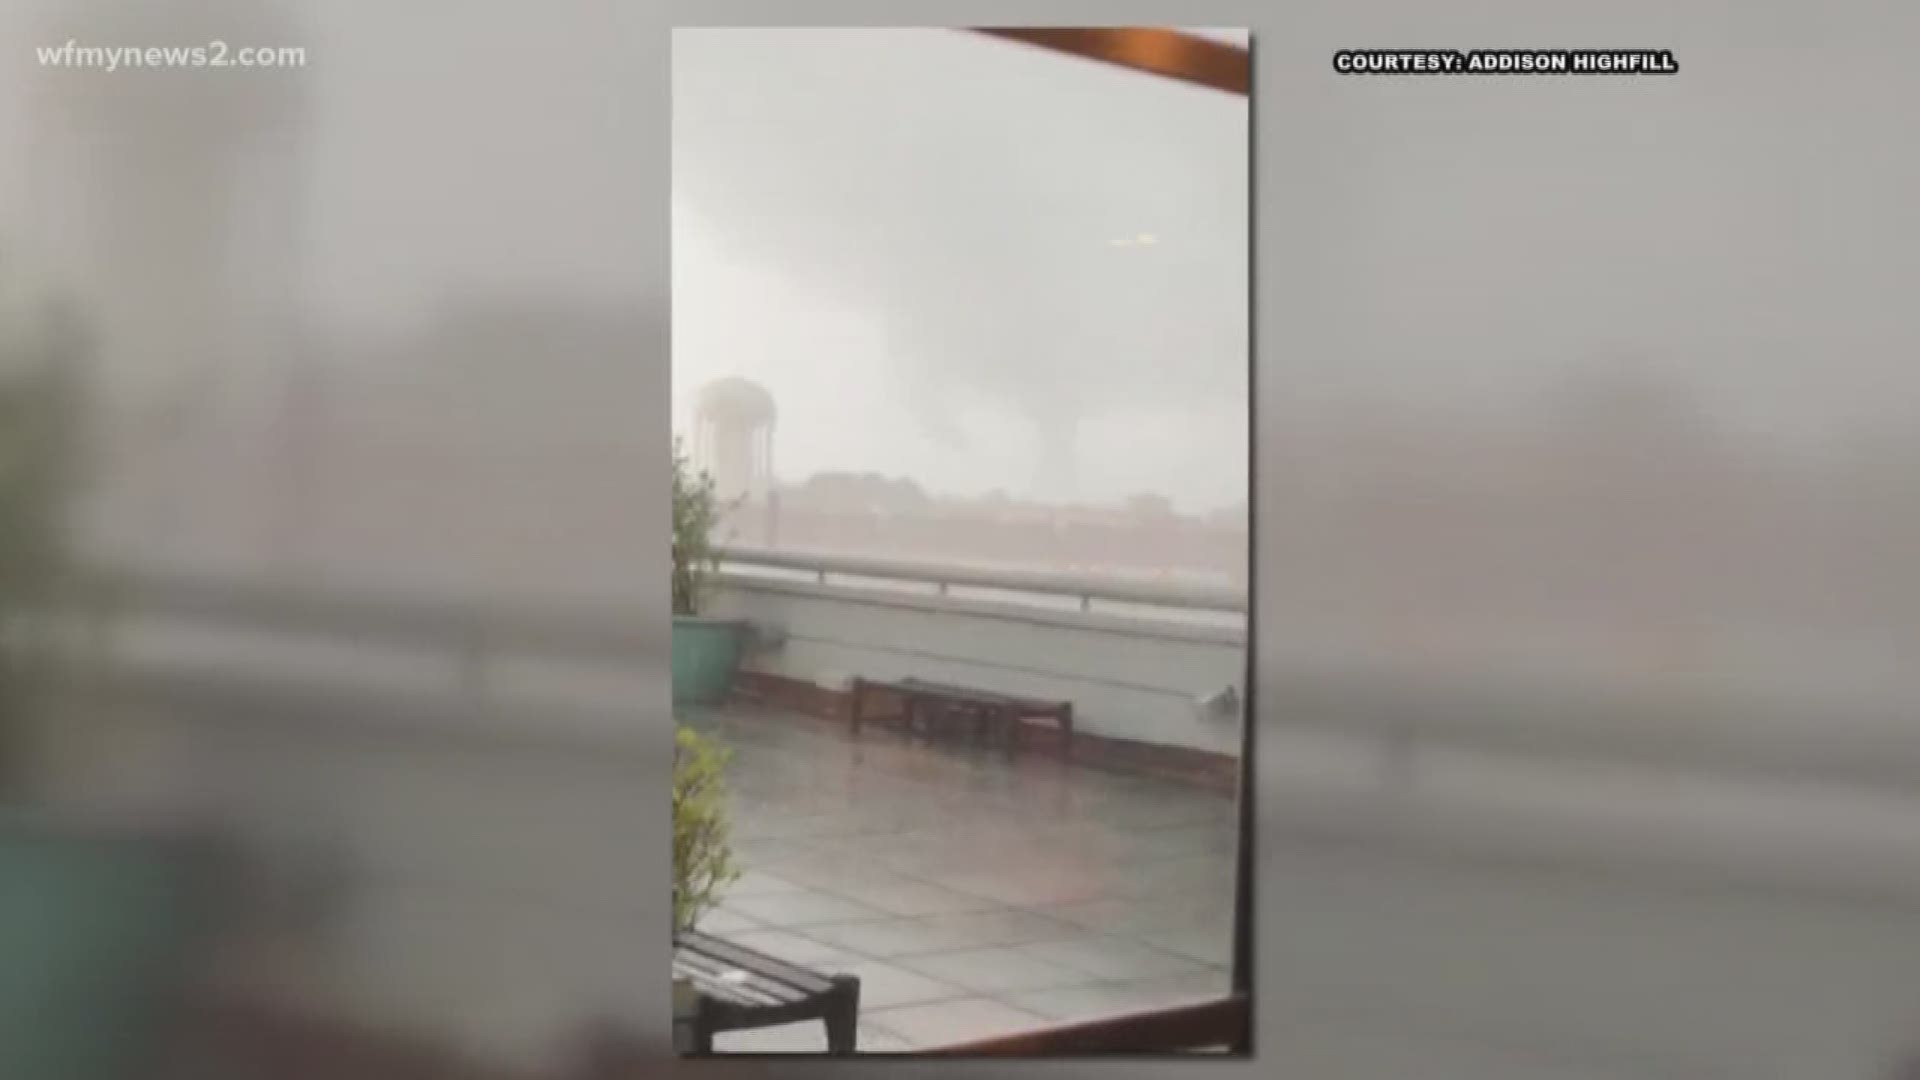 Addison Highfill captured the first video of the tornado in downtown Greensboro. He shares what he remembers from that day.